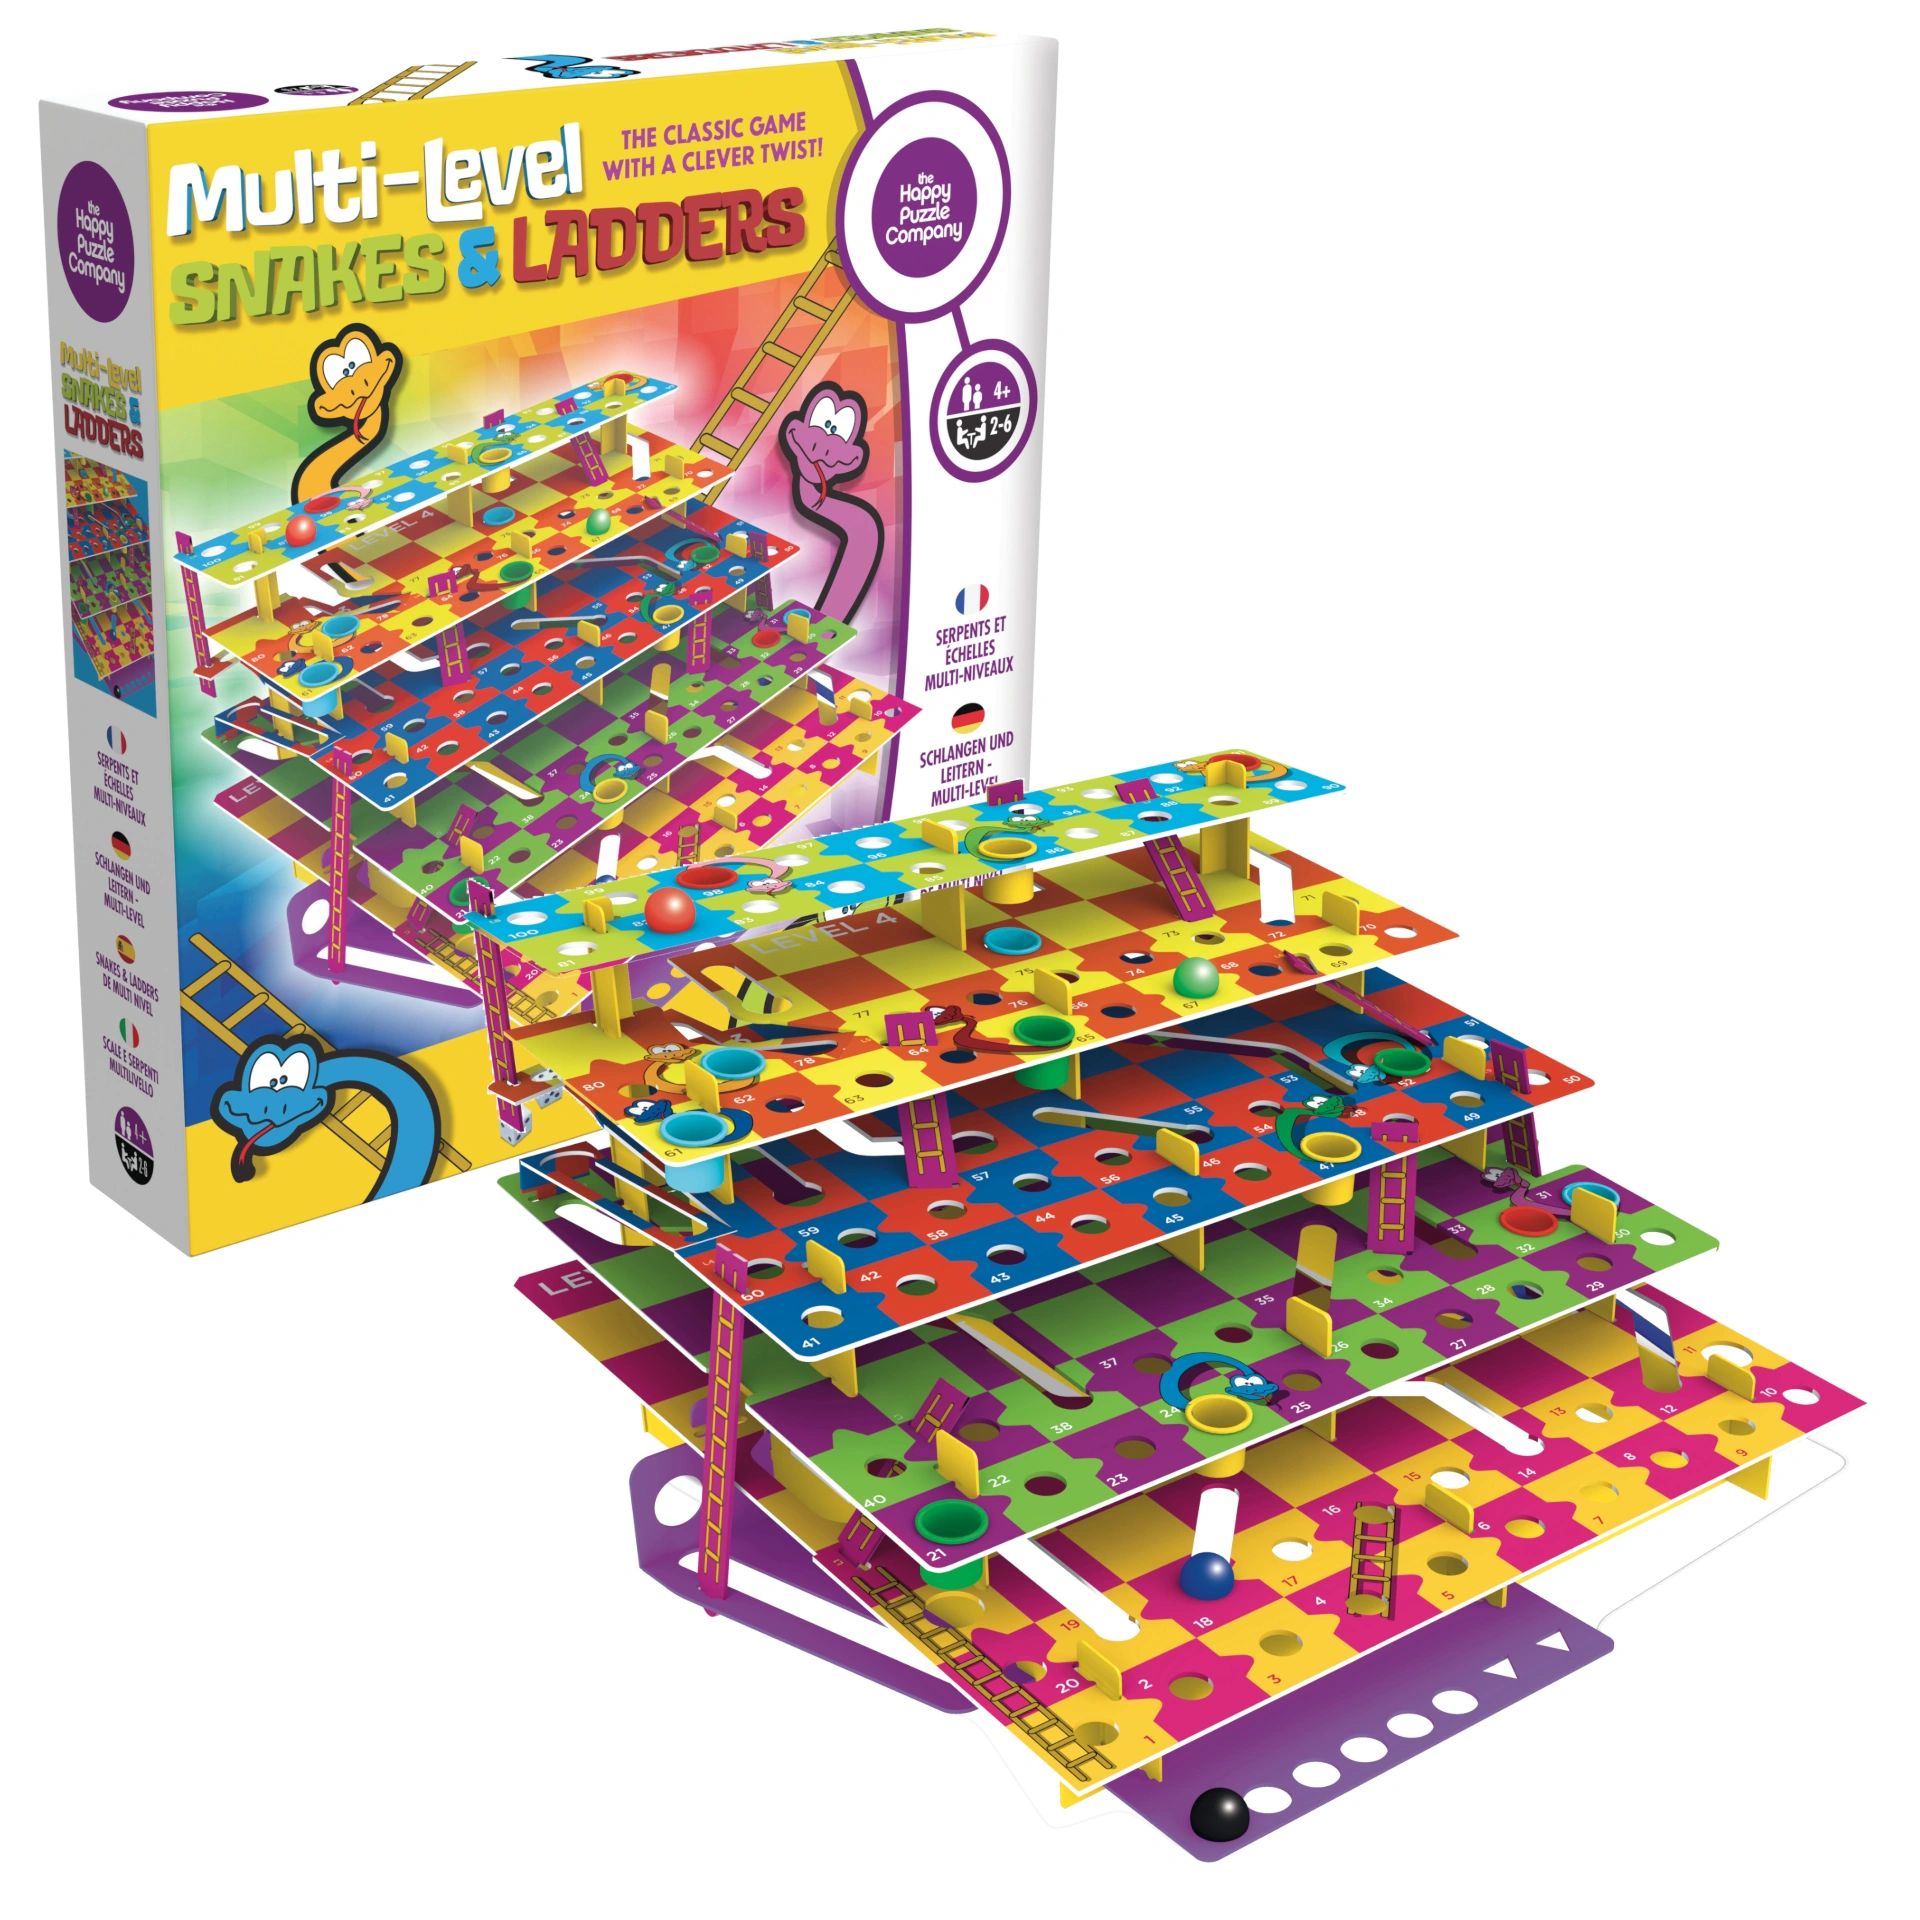 Board Game Multilevel Snake and Ladders Playset Toy 3 Levels,Snake&Ladders 